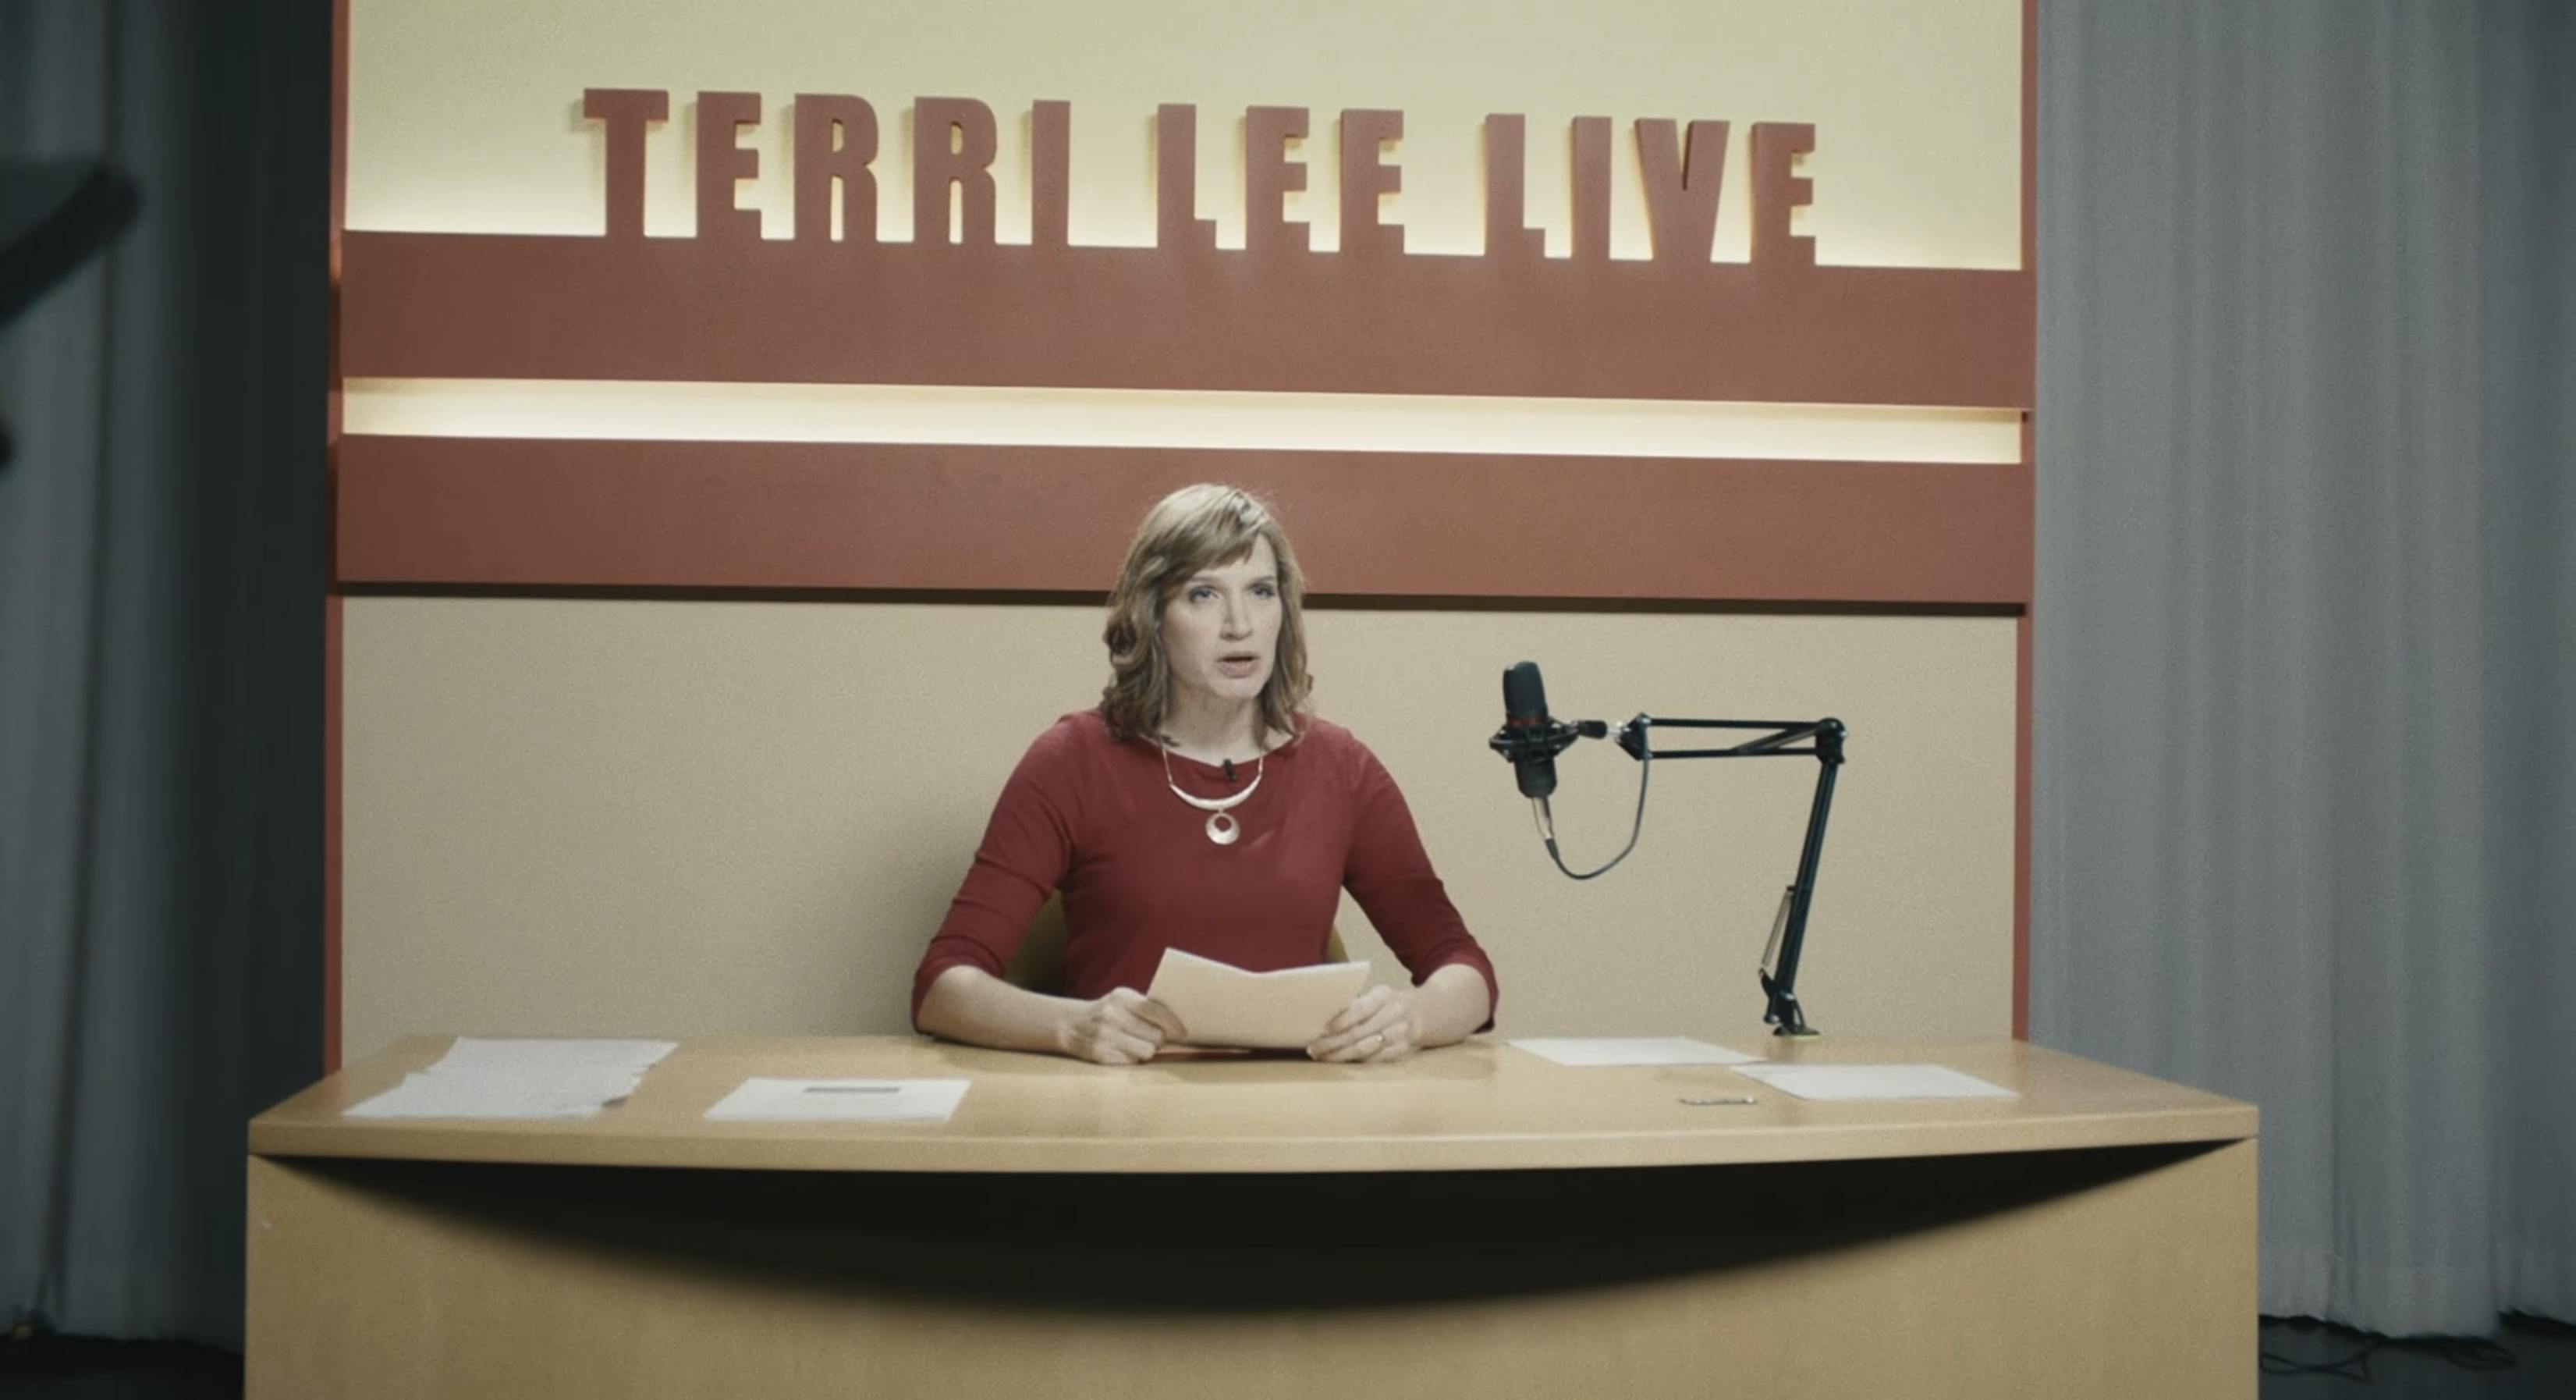 A newscaster in red with the text "Terri Lee Live" in the back